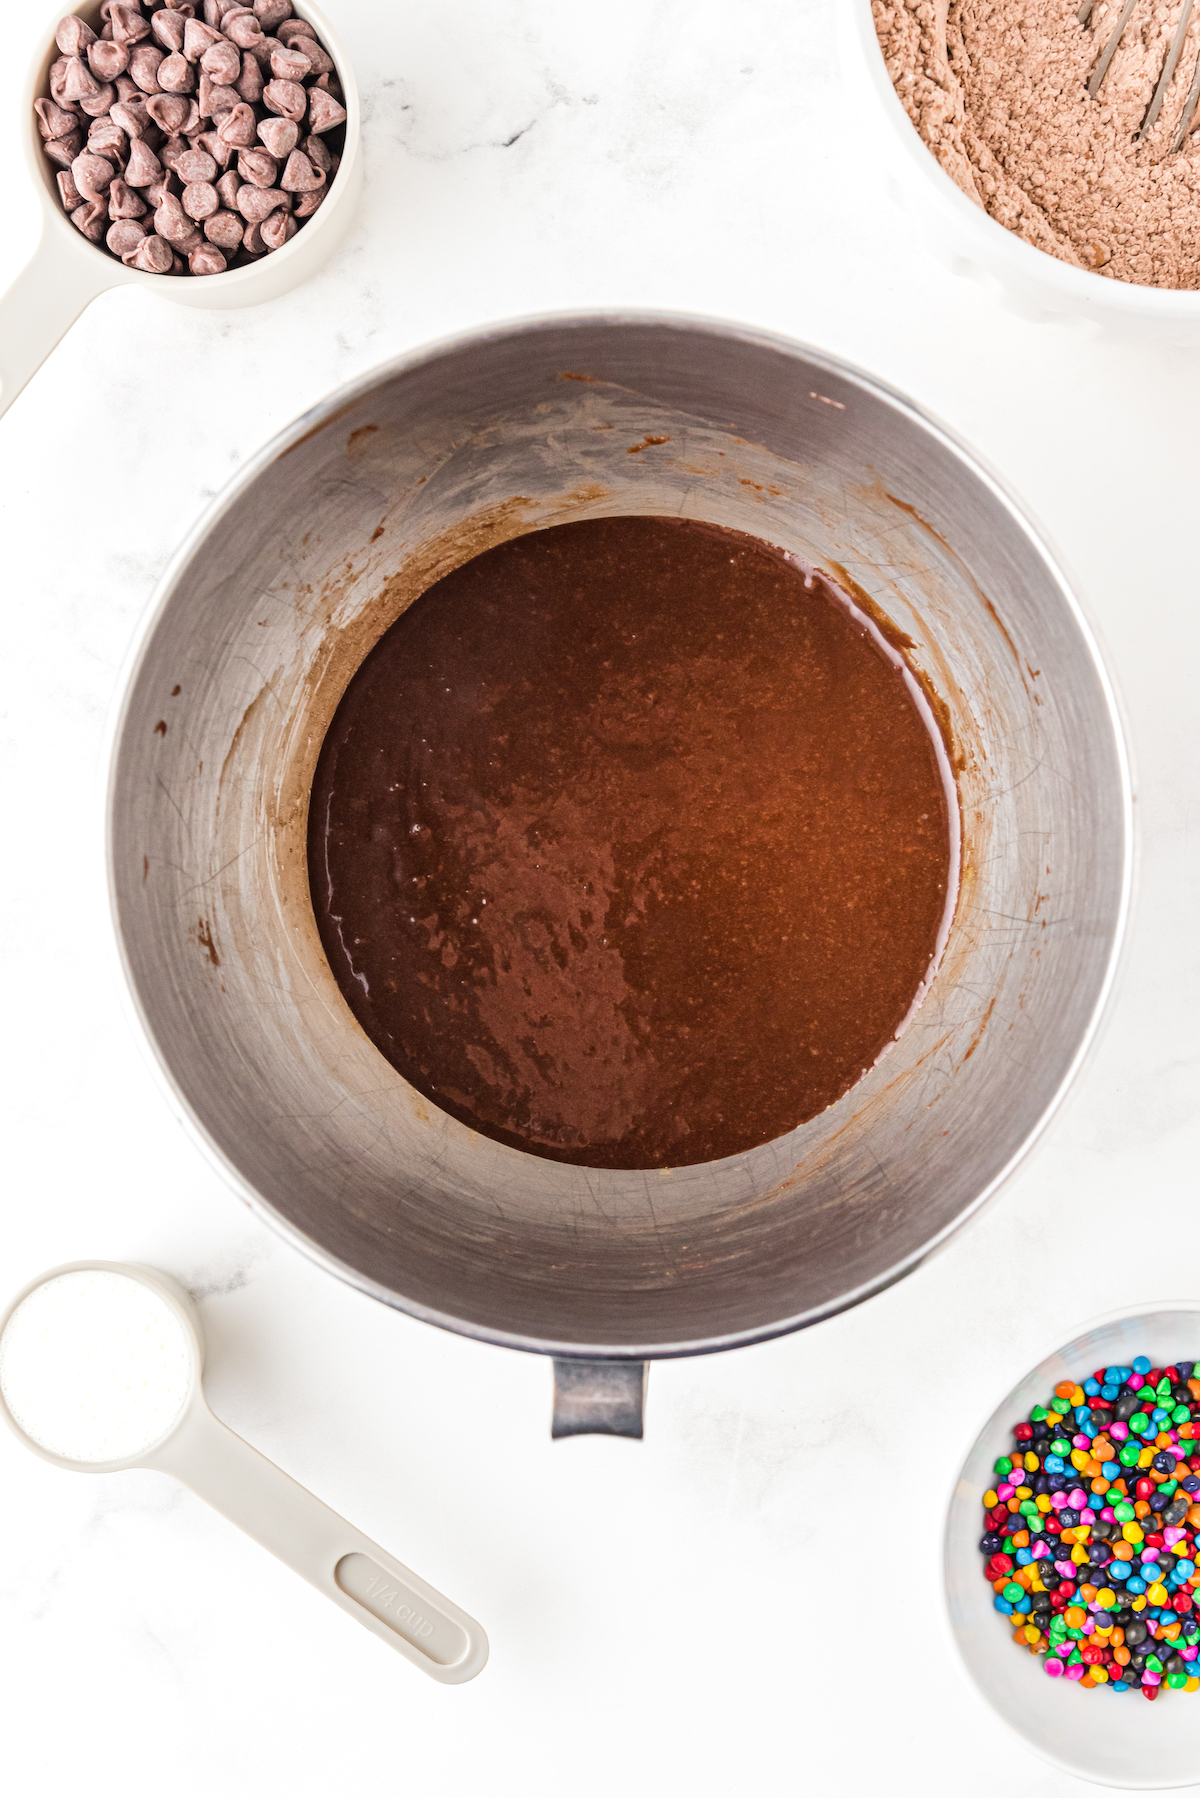 Chocolate batter in a mixing bowl.